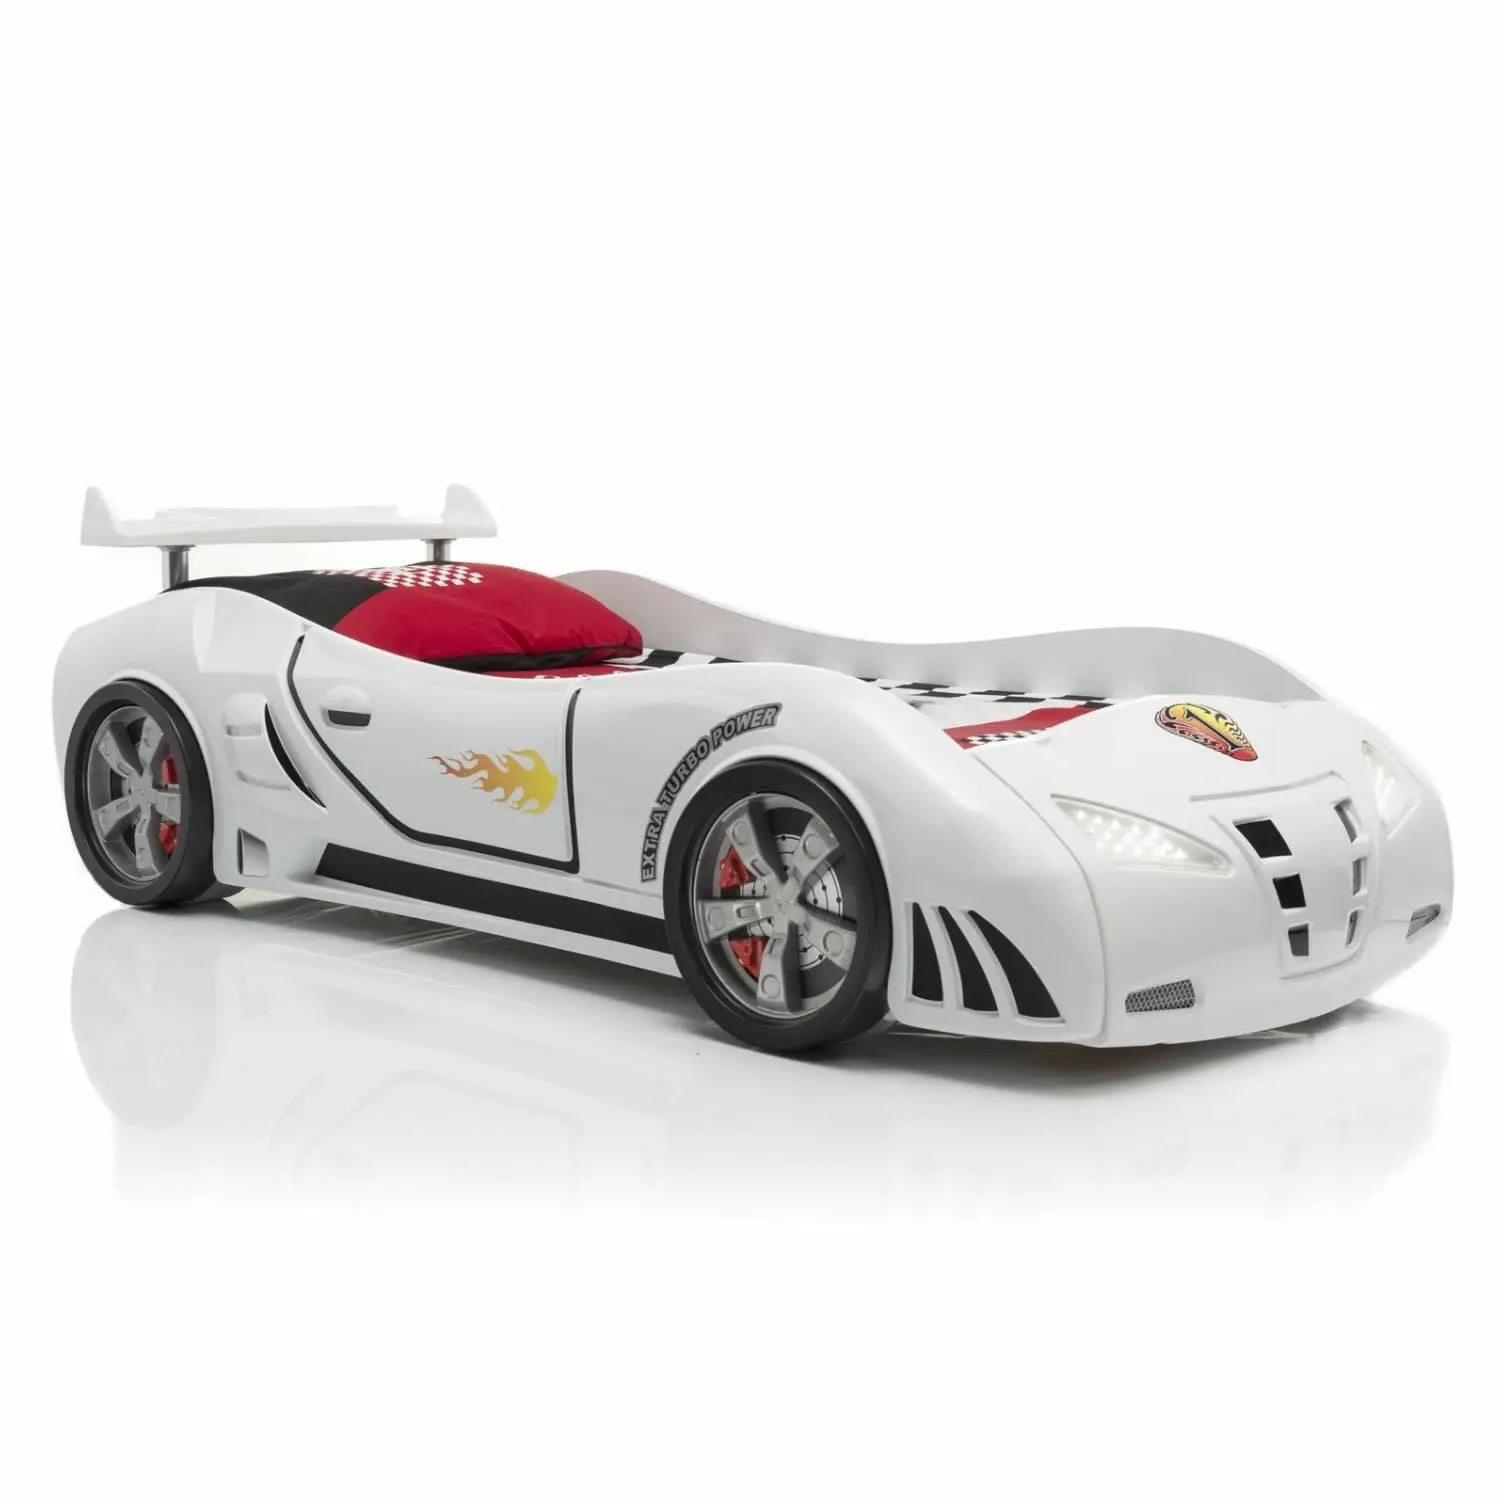 files/M3-Infiniti-Race-Car-Bed-for-Kids-w-LEDs_-Sound-effects-and-Free-Mattress-CaKidsRoom-1686084326_1500x1500_cce6f4ae-bf1e-4513-94b9-478fbdd4a4d1.webp